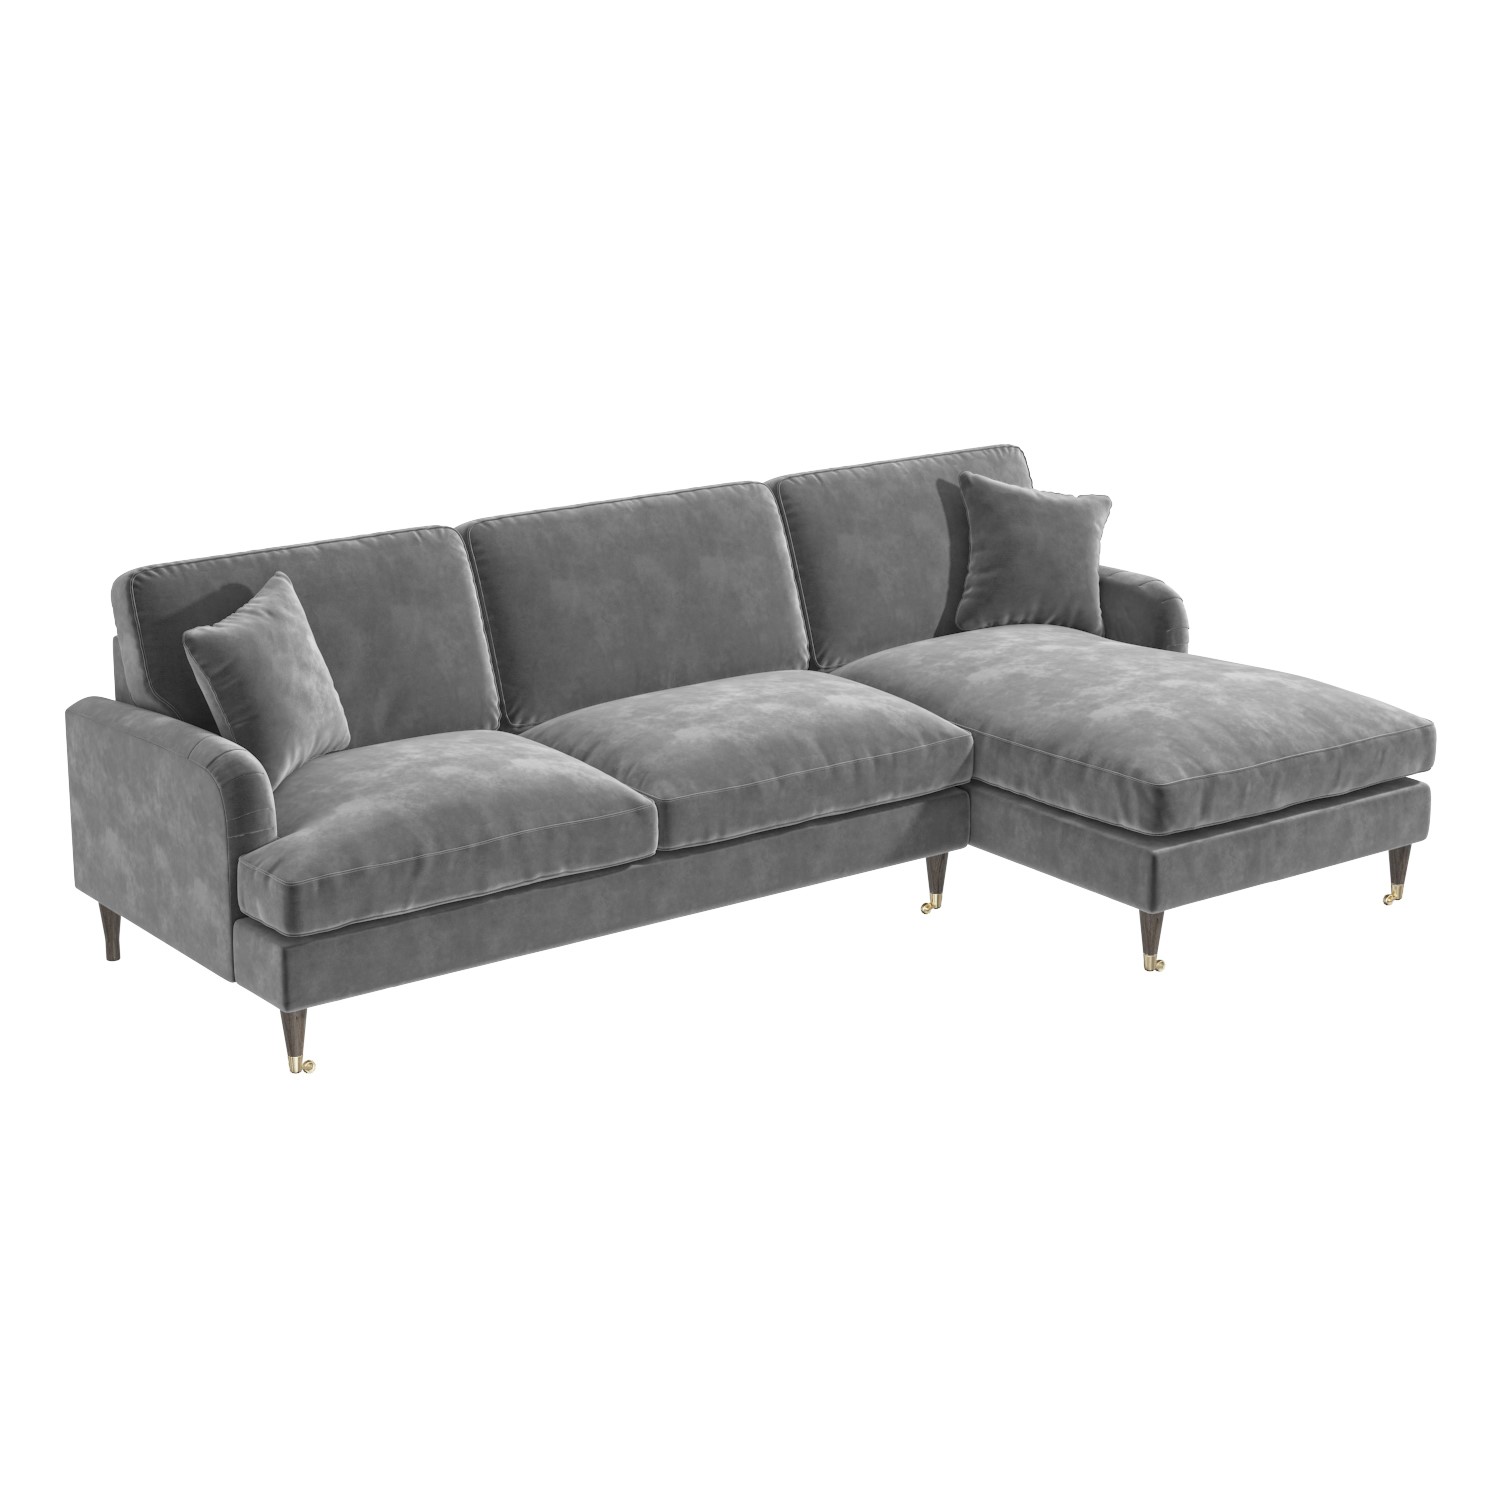 Read more about Grey velvet right hand facing l shaped sofa seats 4 payton